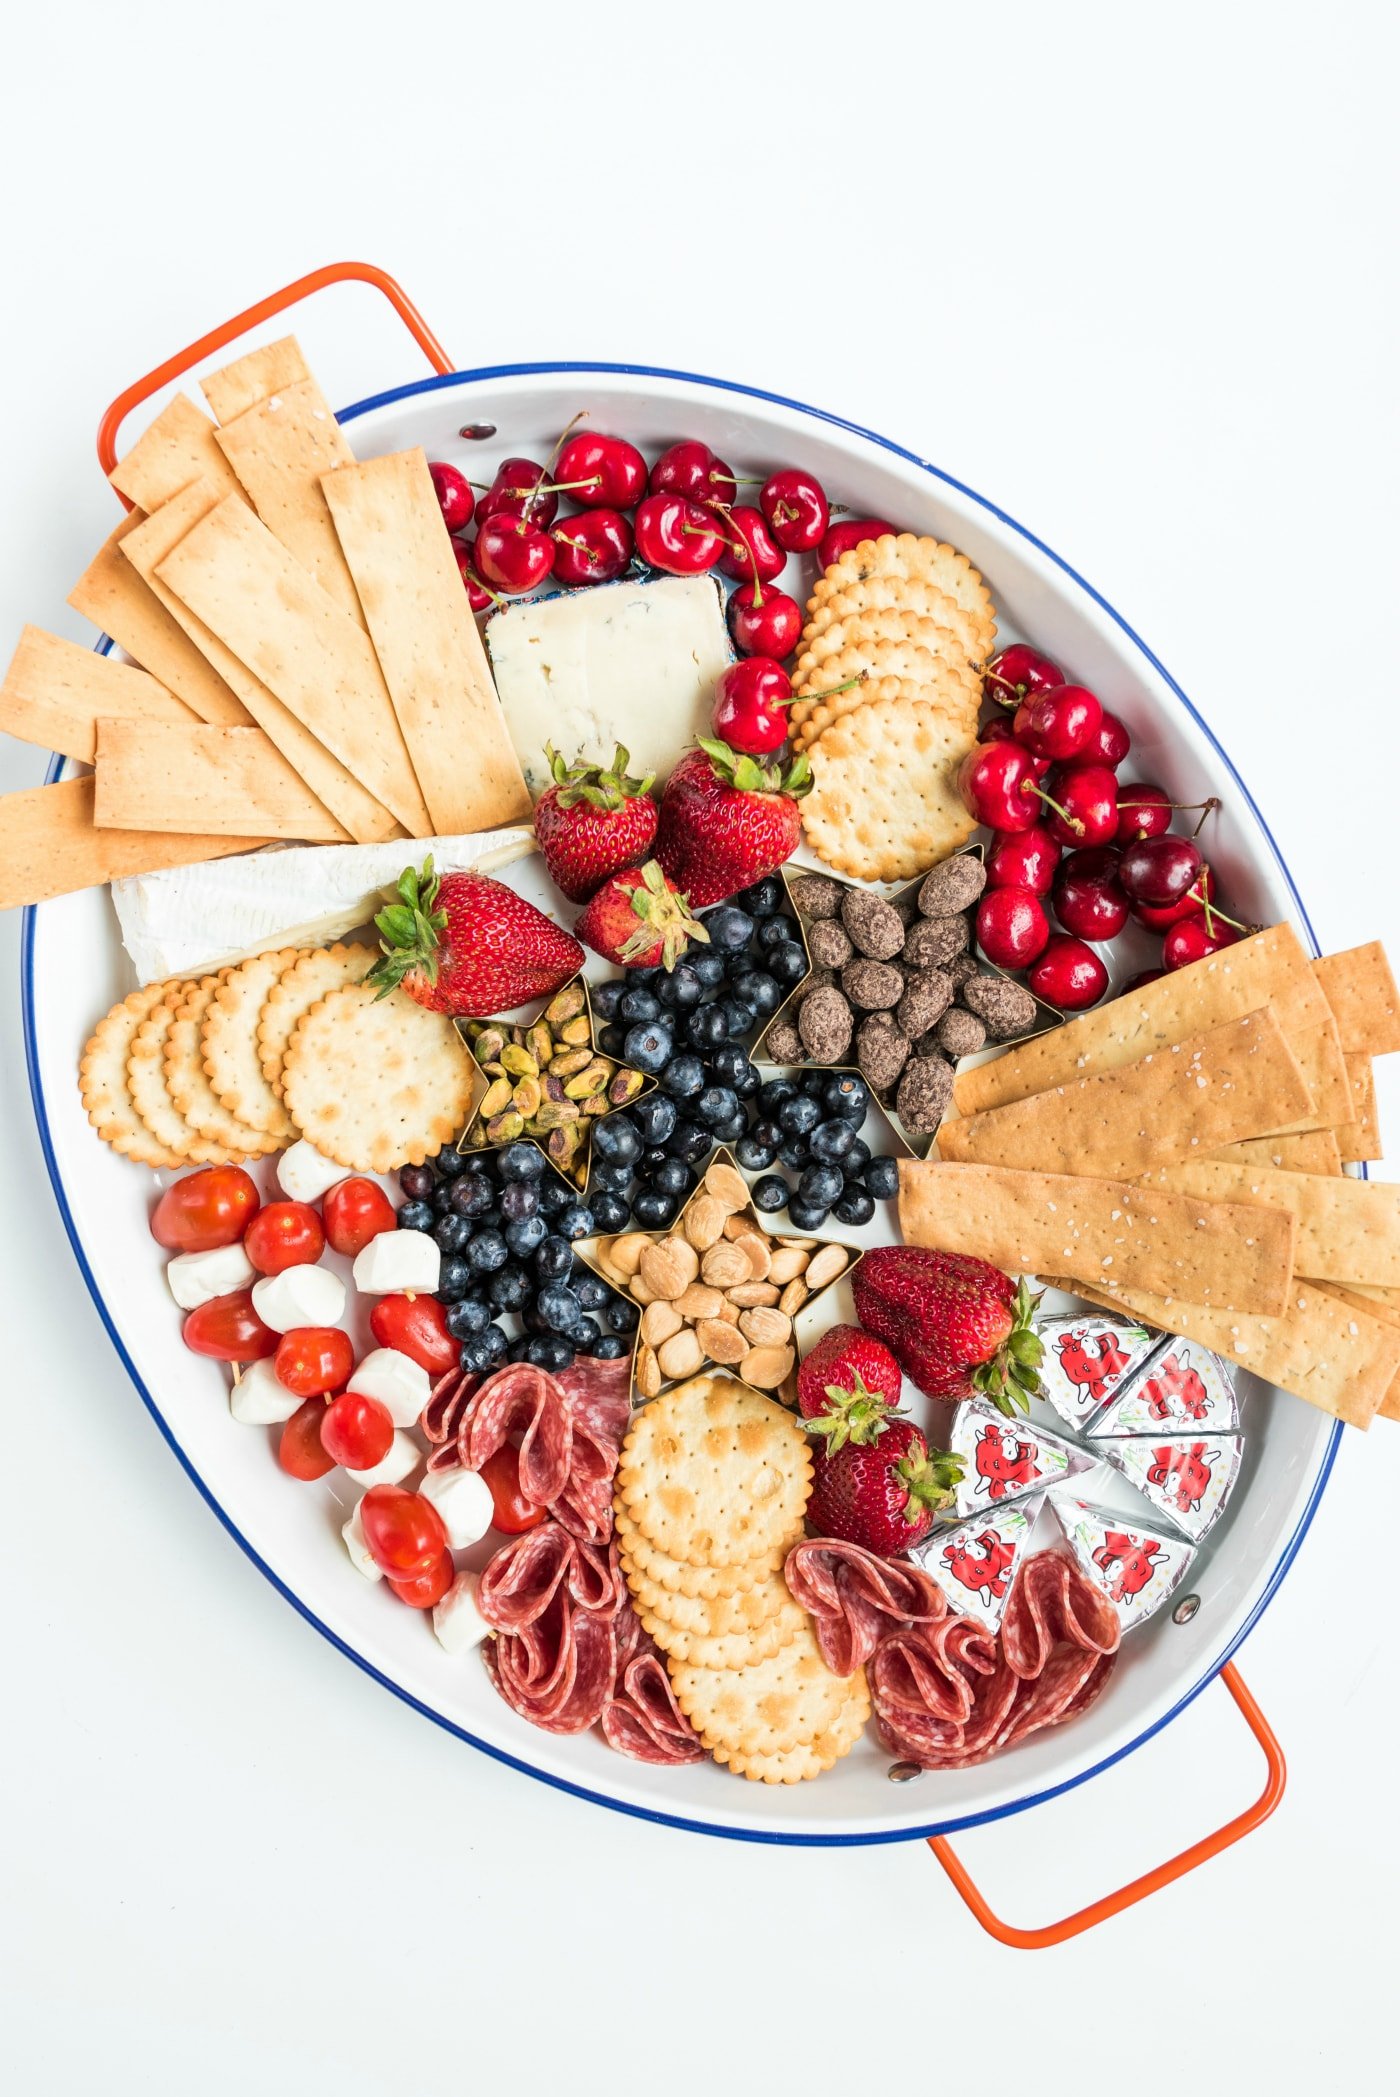 How We Cheese and Charcuterie Board - The BakerMama